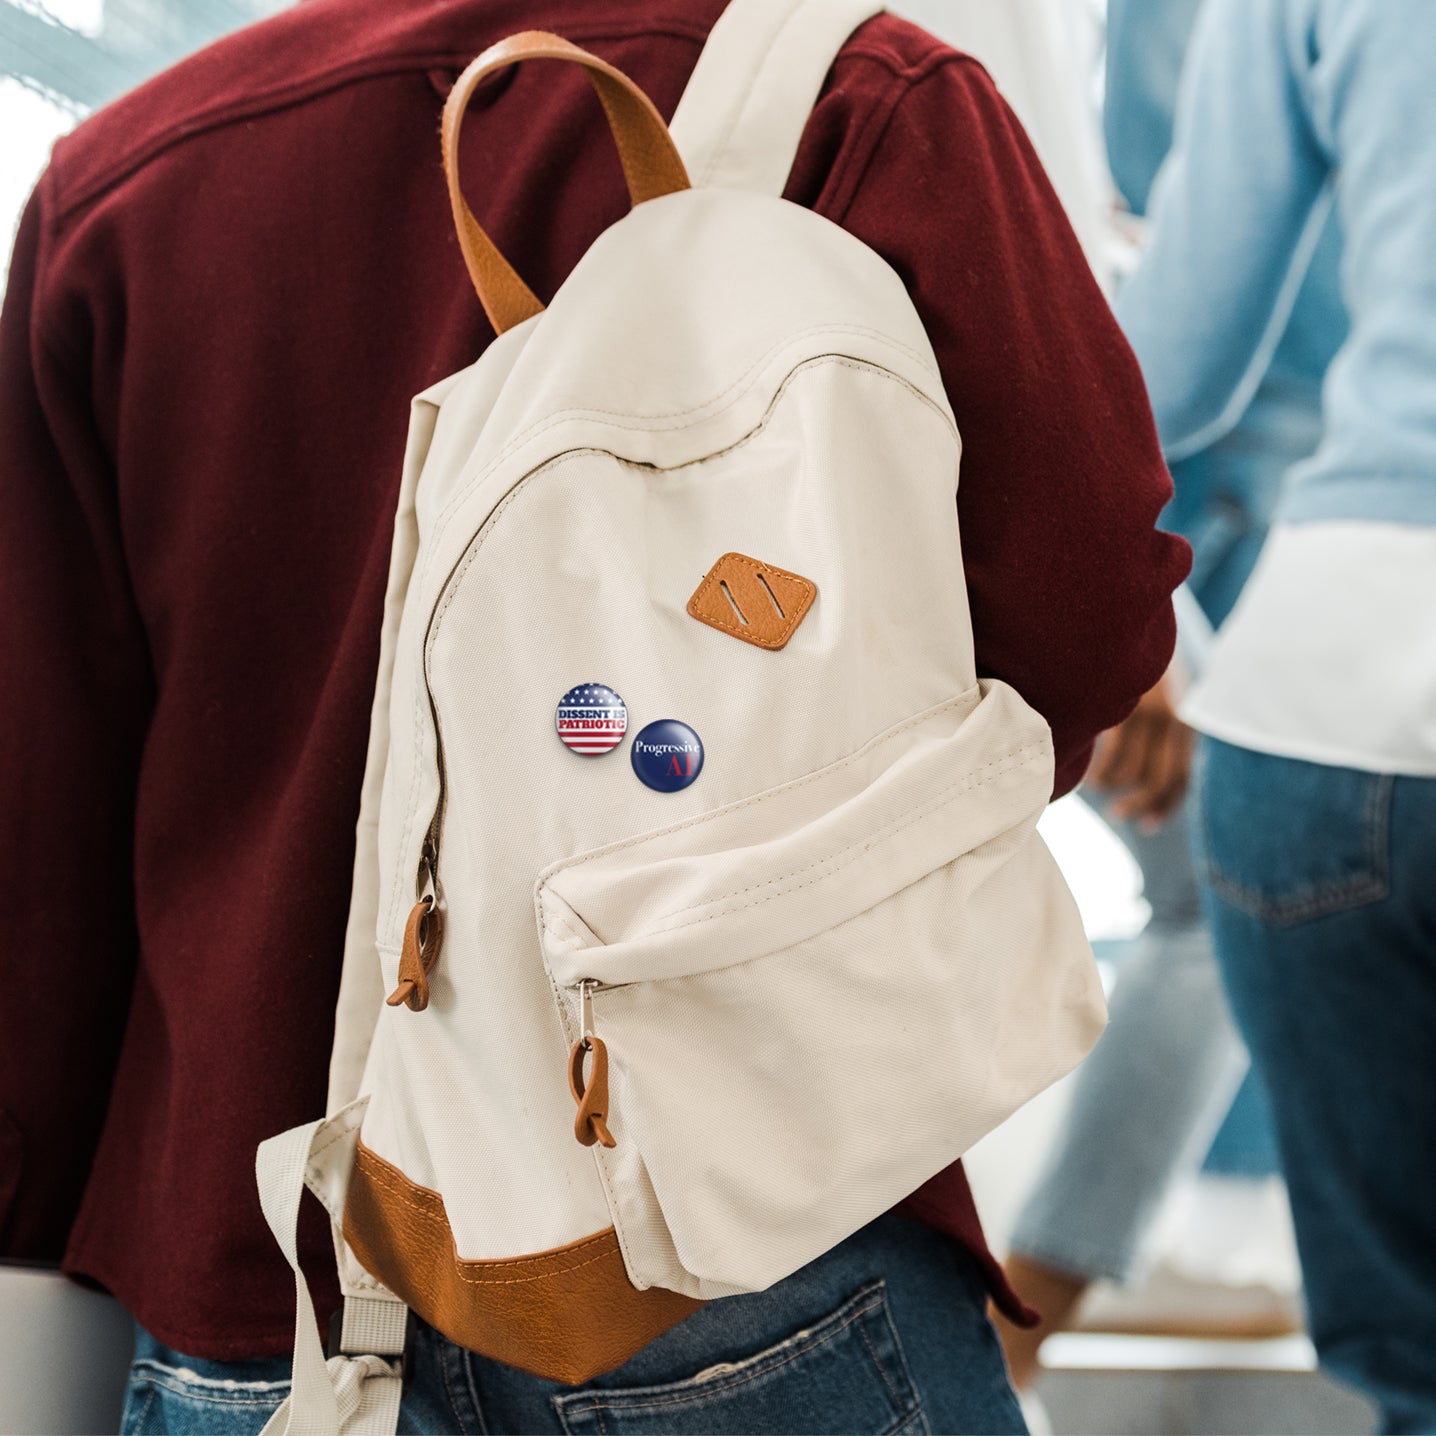 dissent is patriotic buttons on knapsack